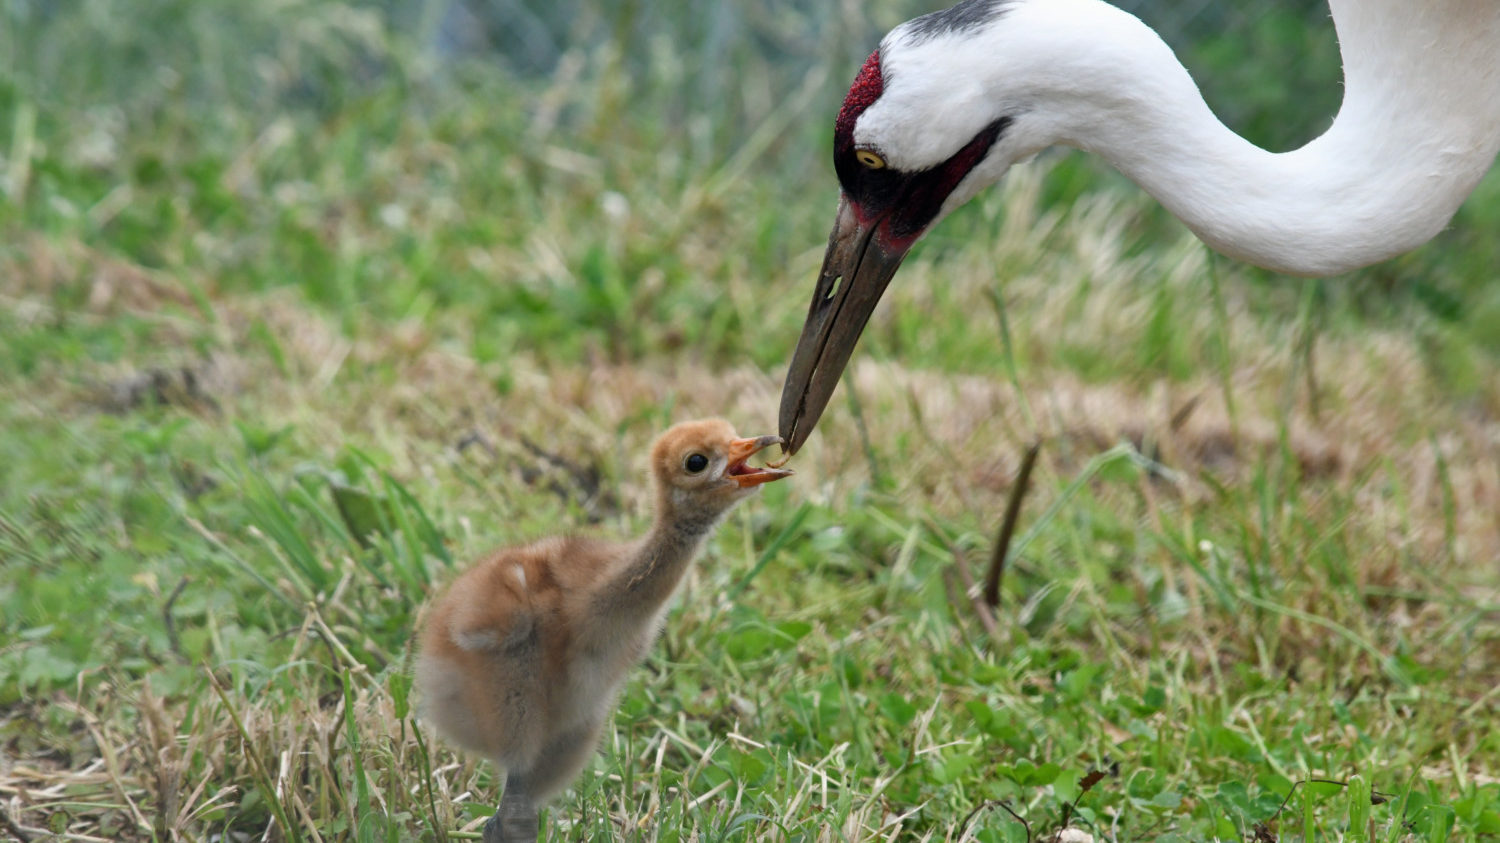 Parent and baby whooping crane born at National Zoo